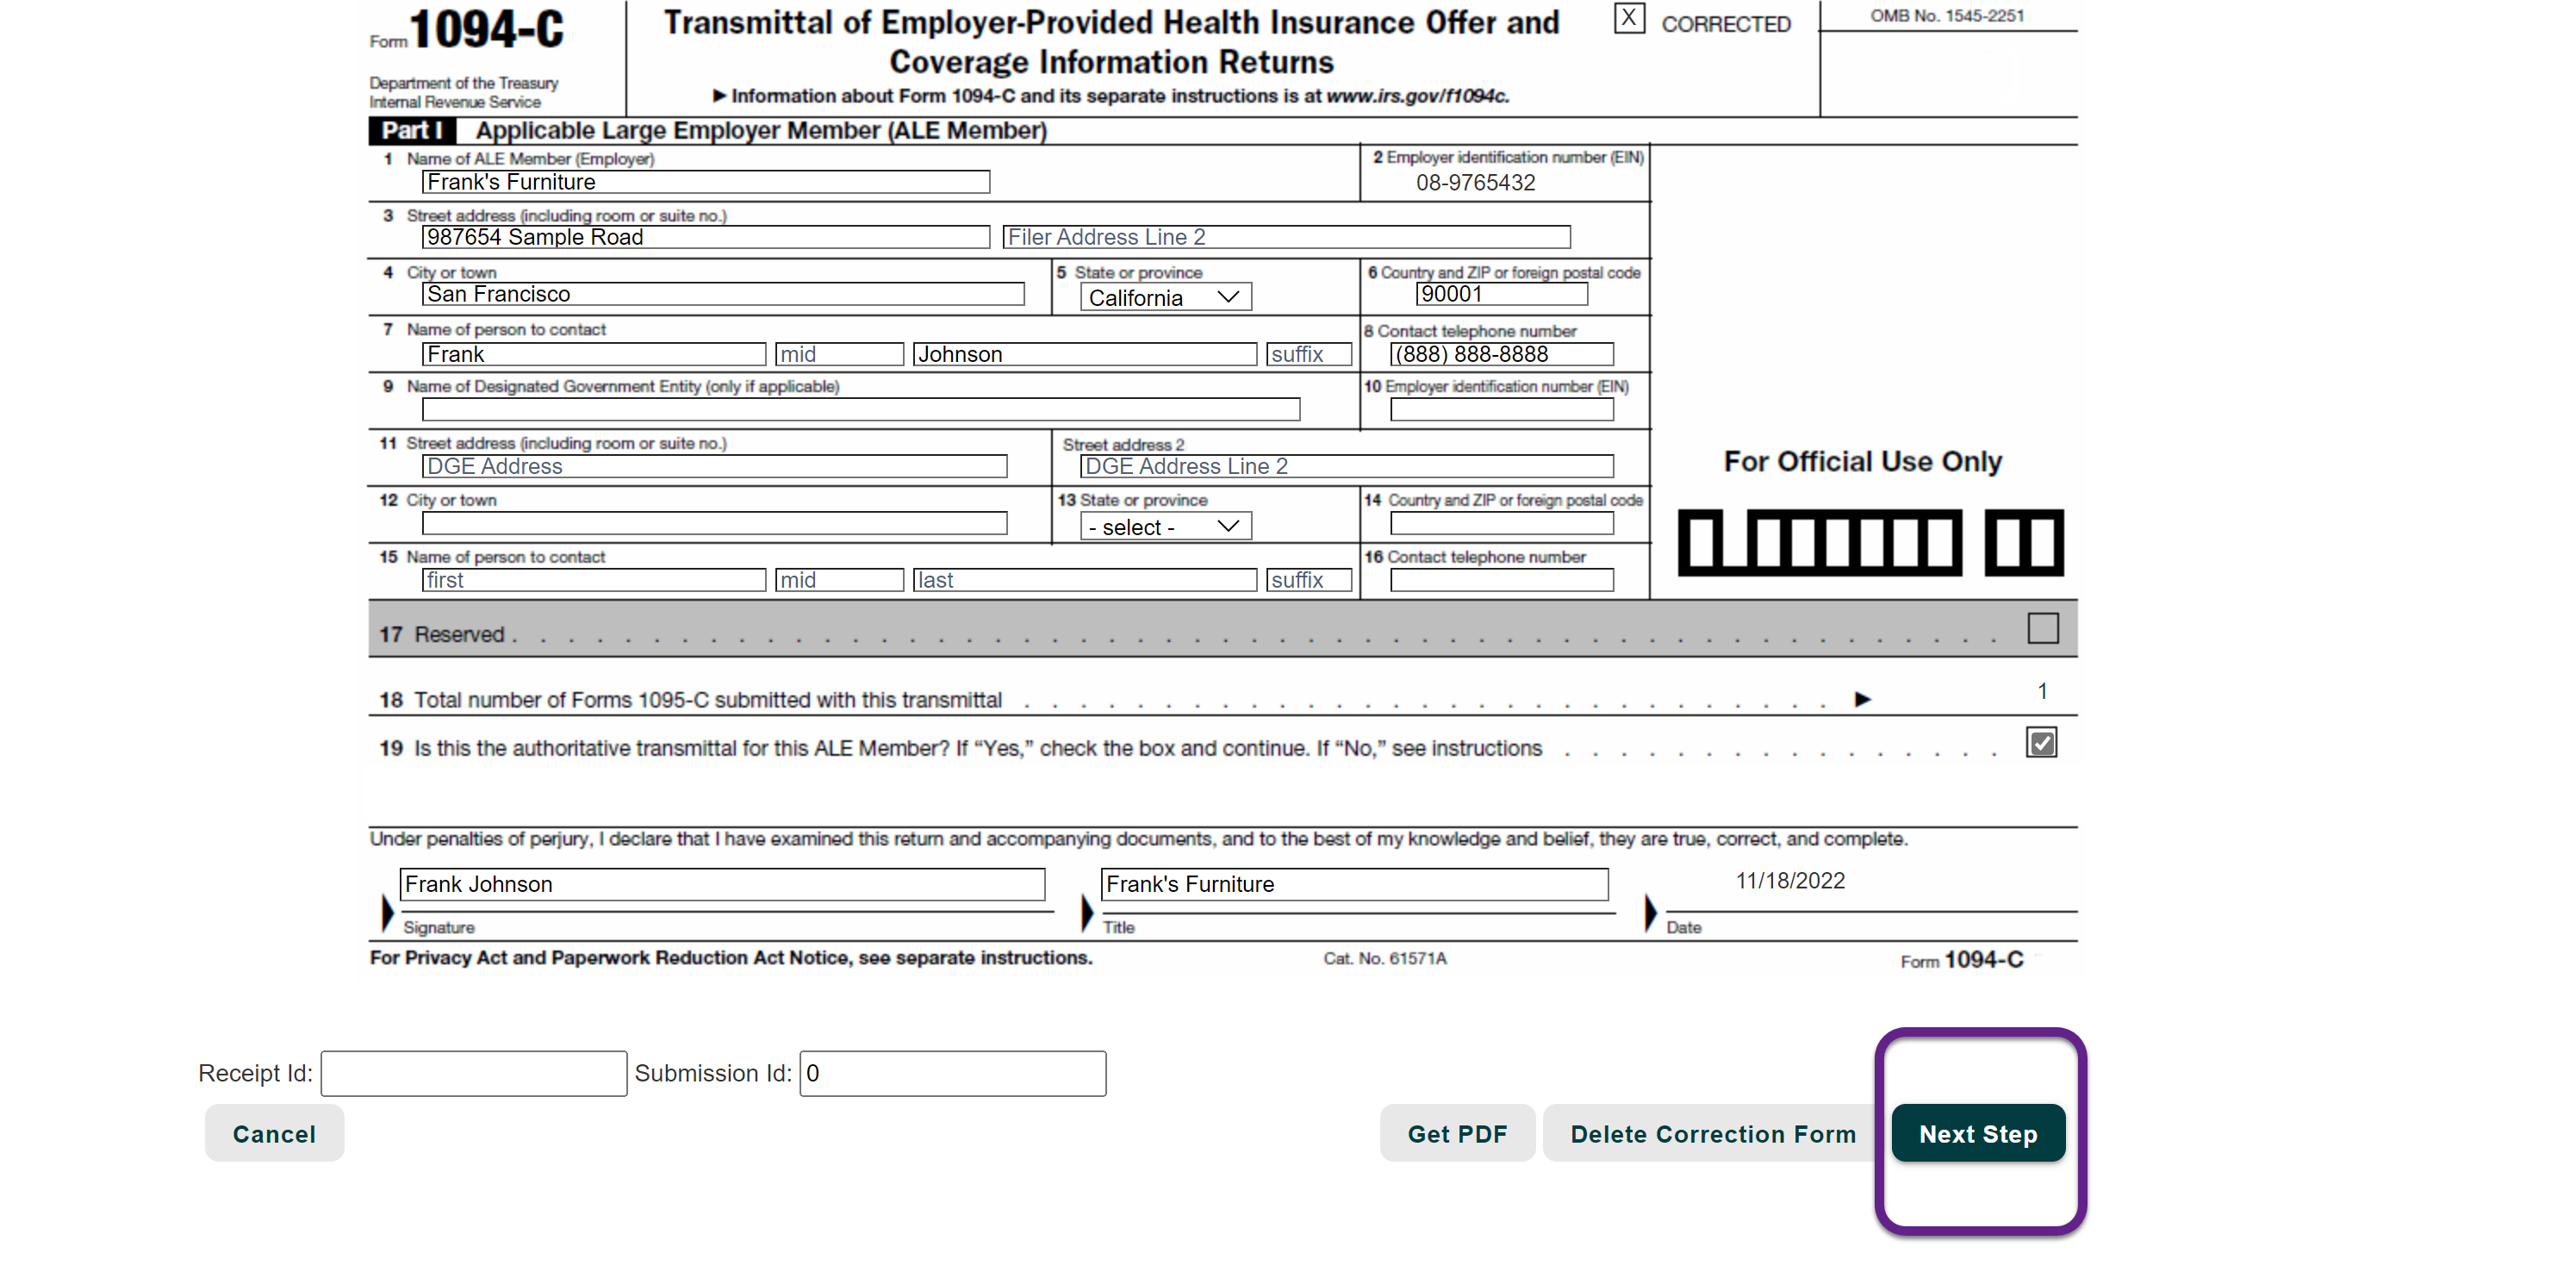 Image of an example 1094-C Authoritative Transmittal form with a callout on the Next Step button.